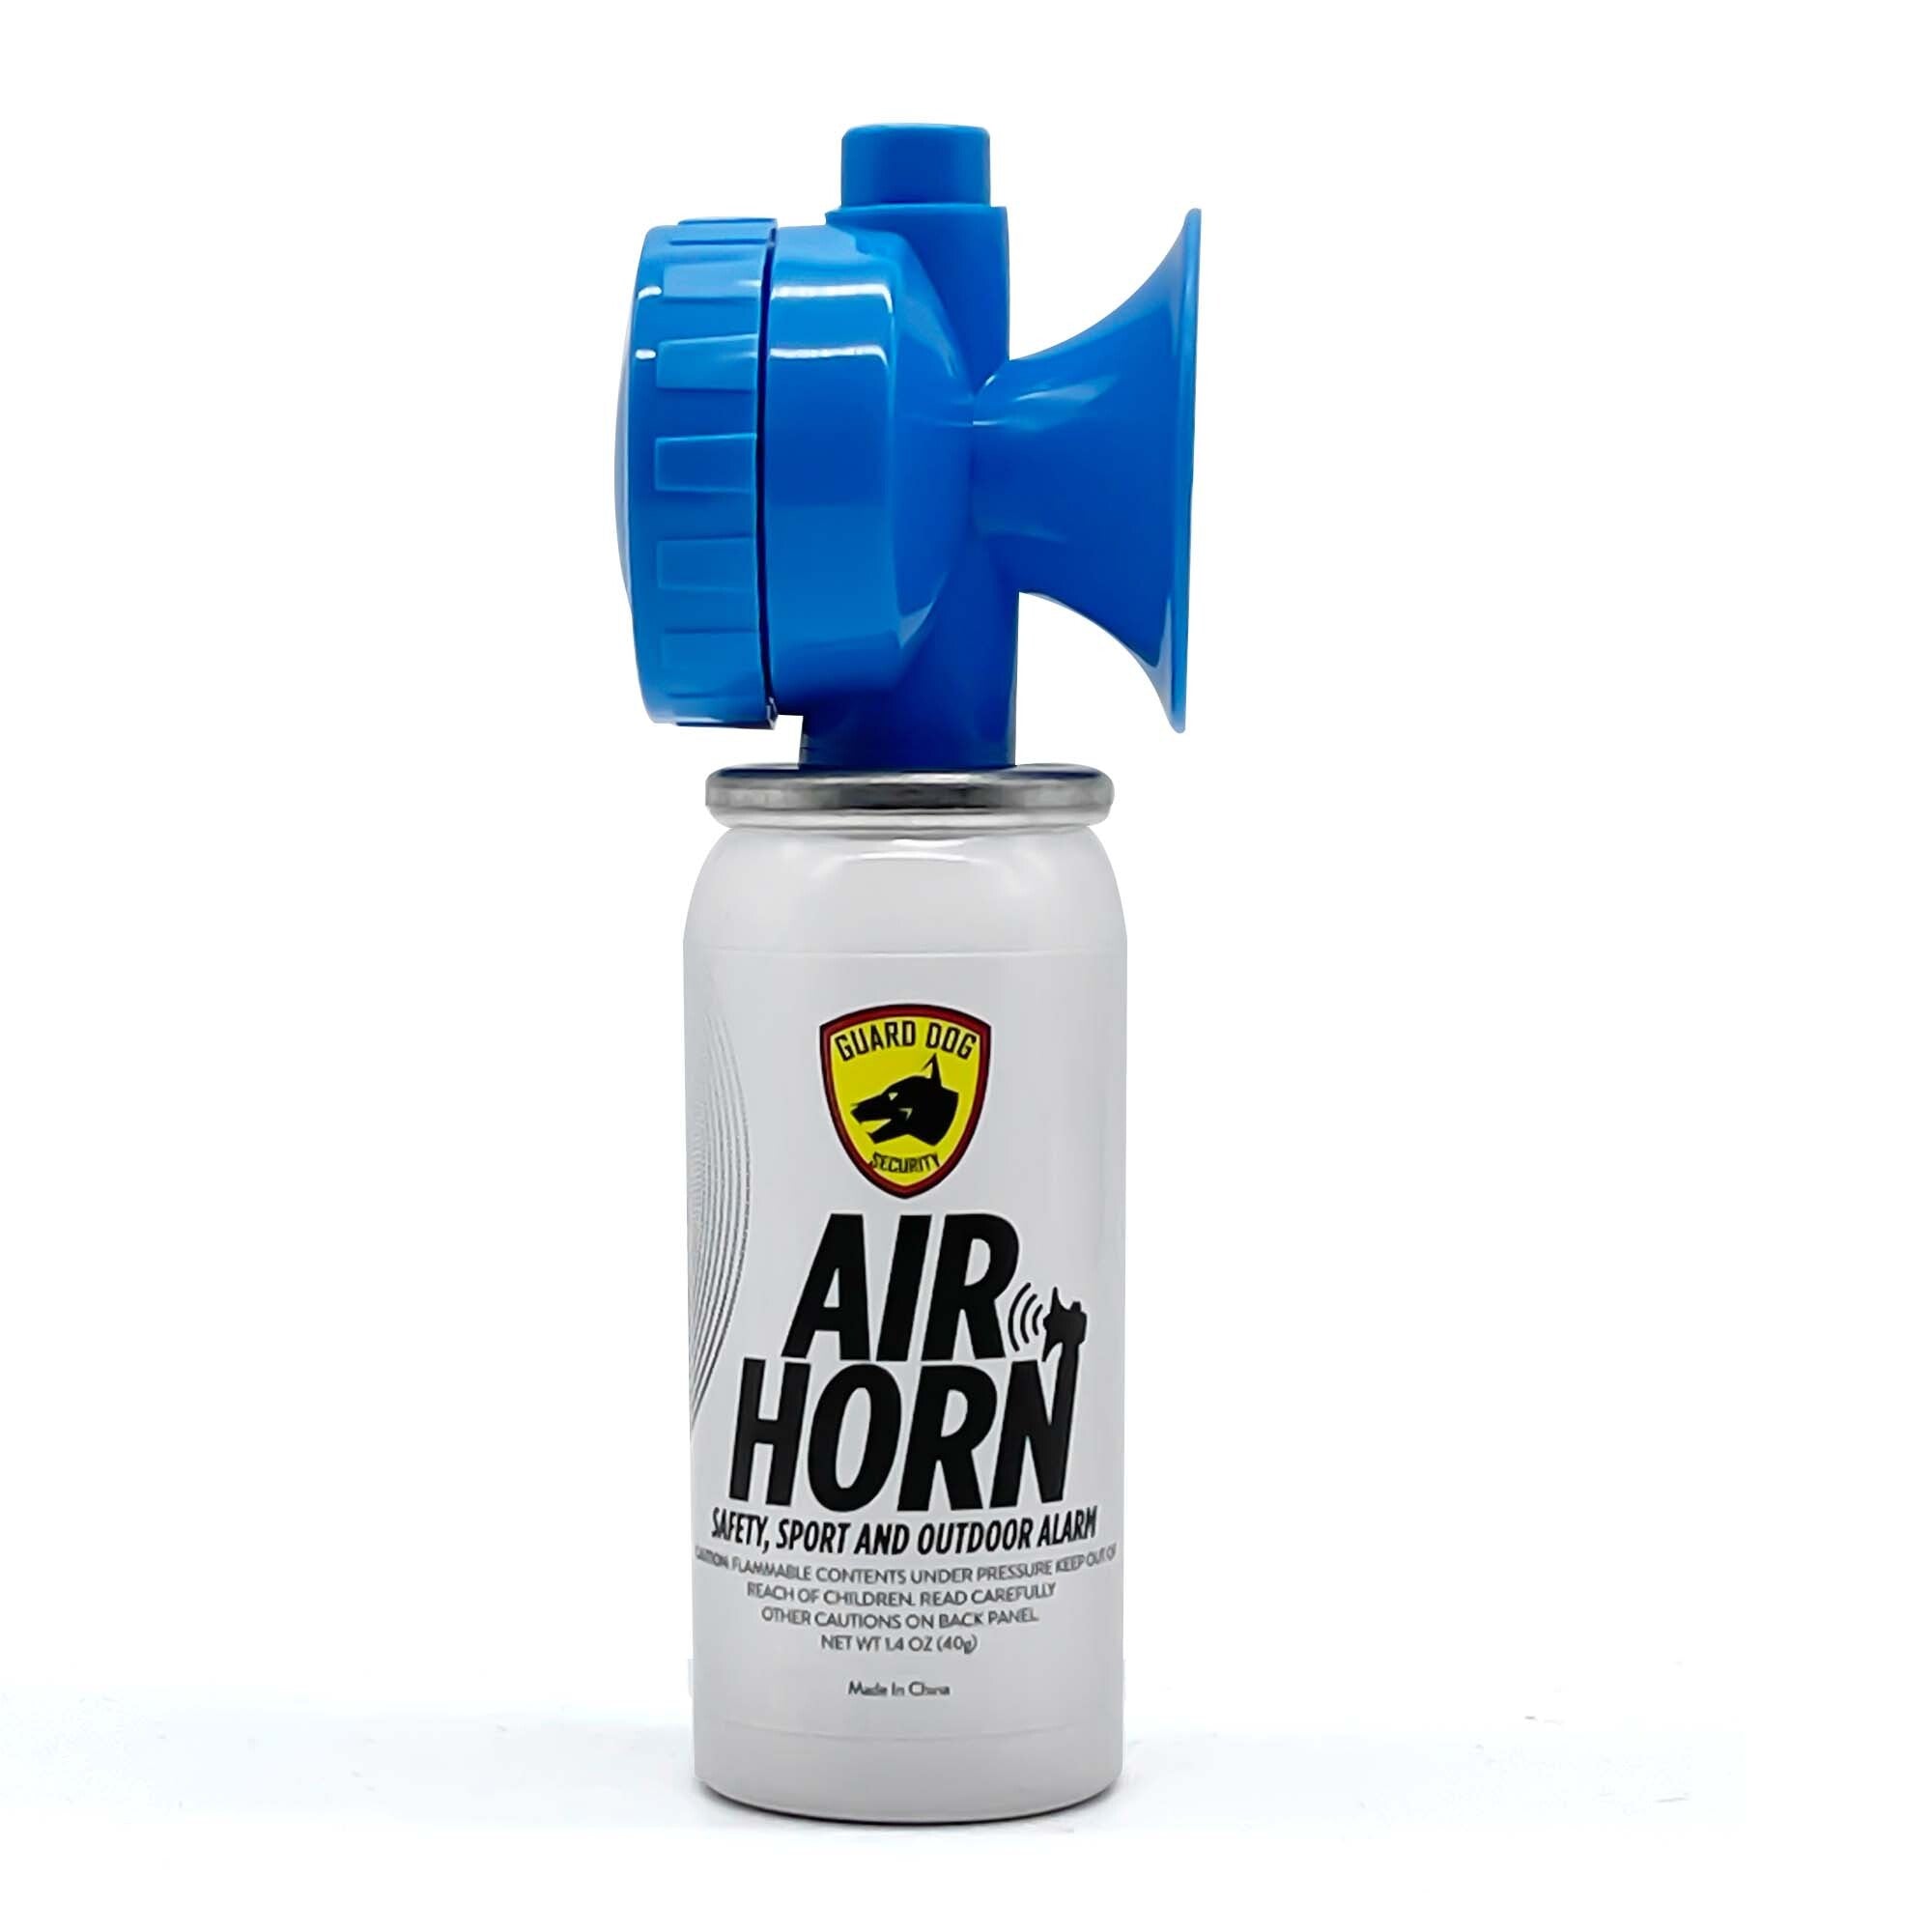 Buy Air Horn 1.4 oz online, 1-mile away safety and Outdoor Alarm Refills